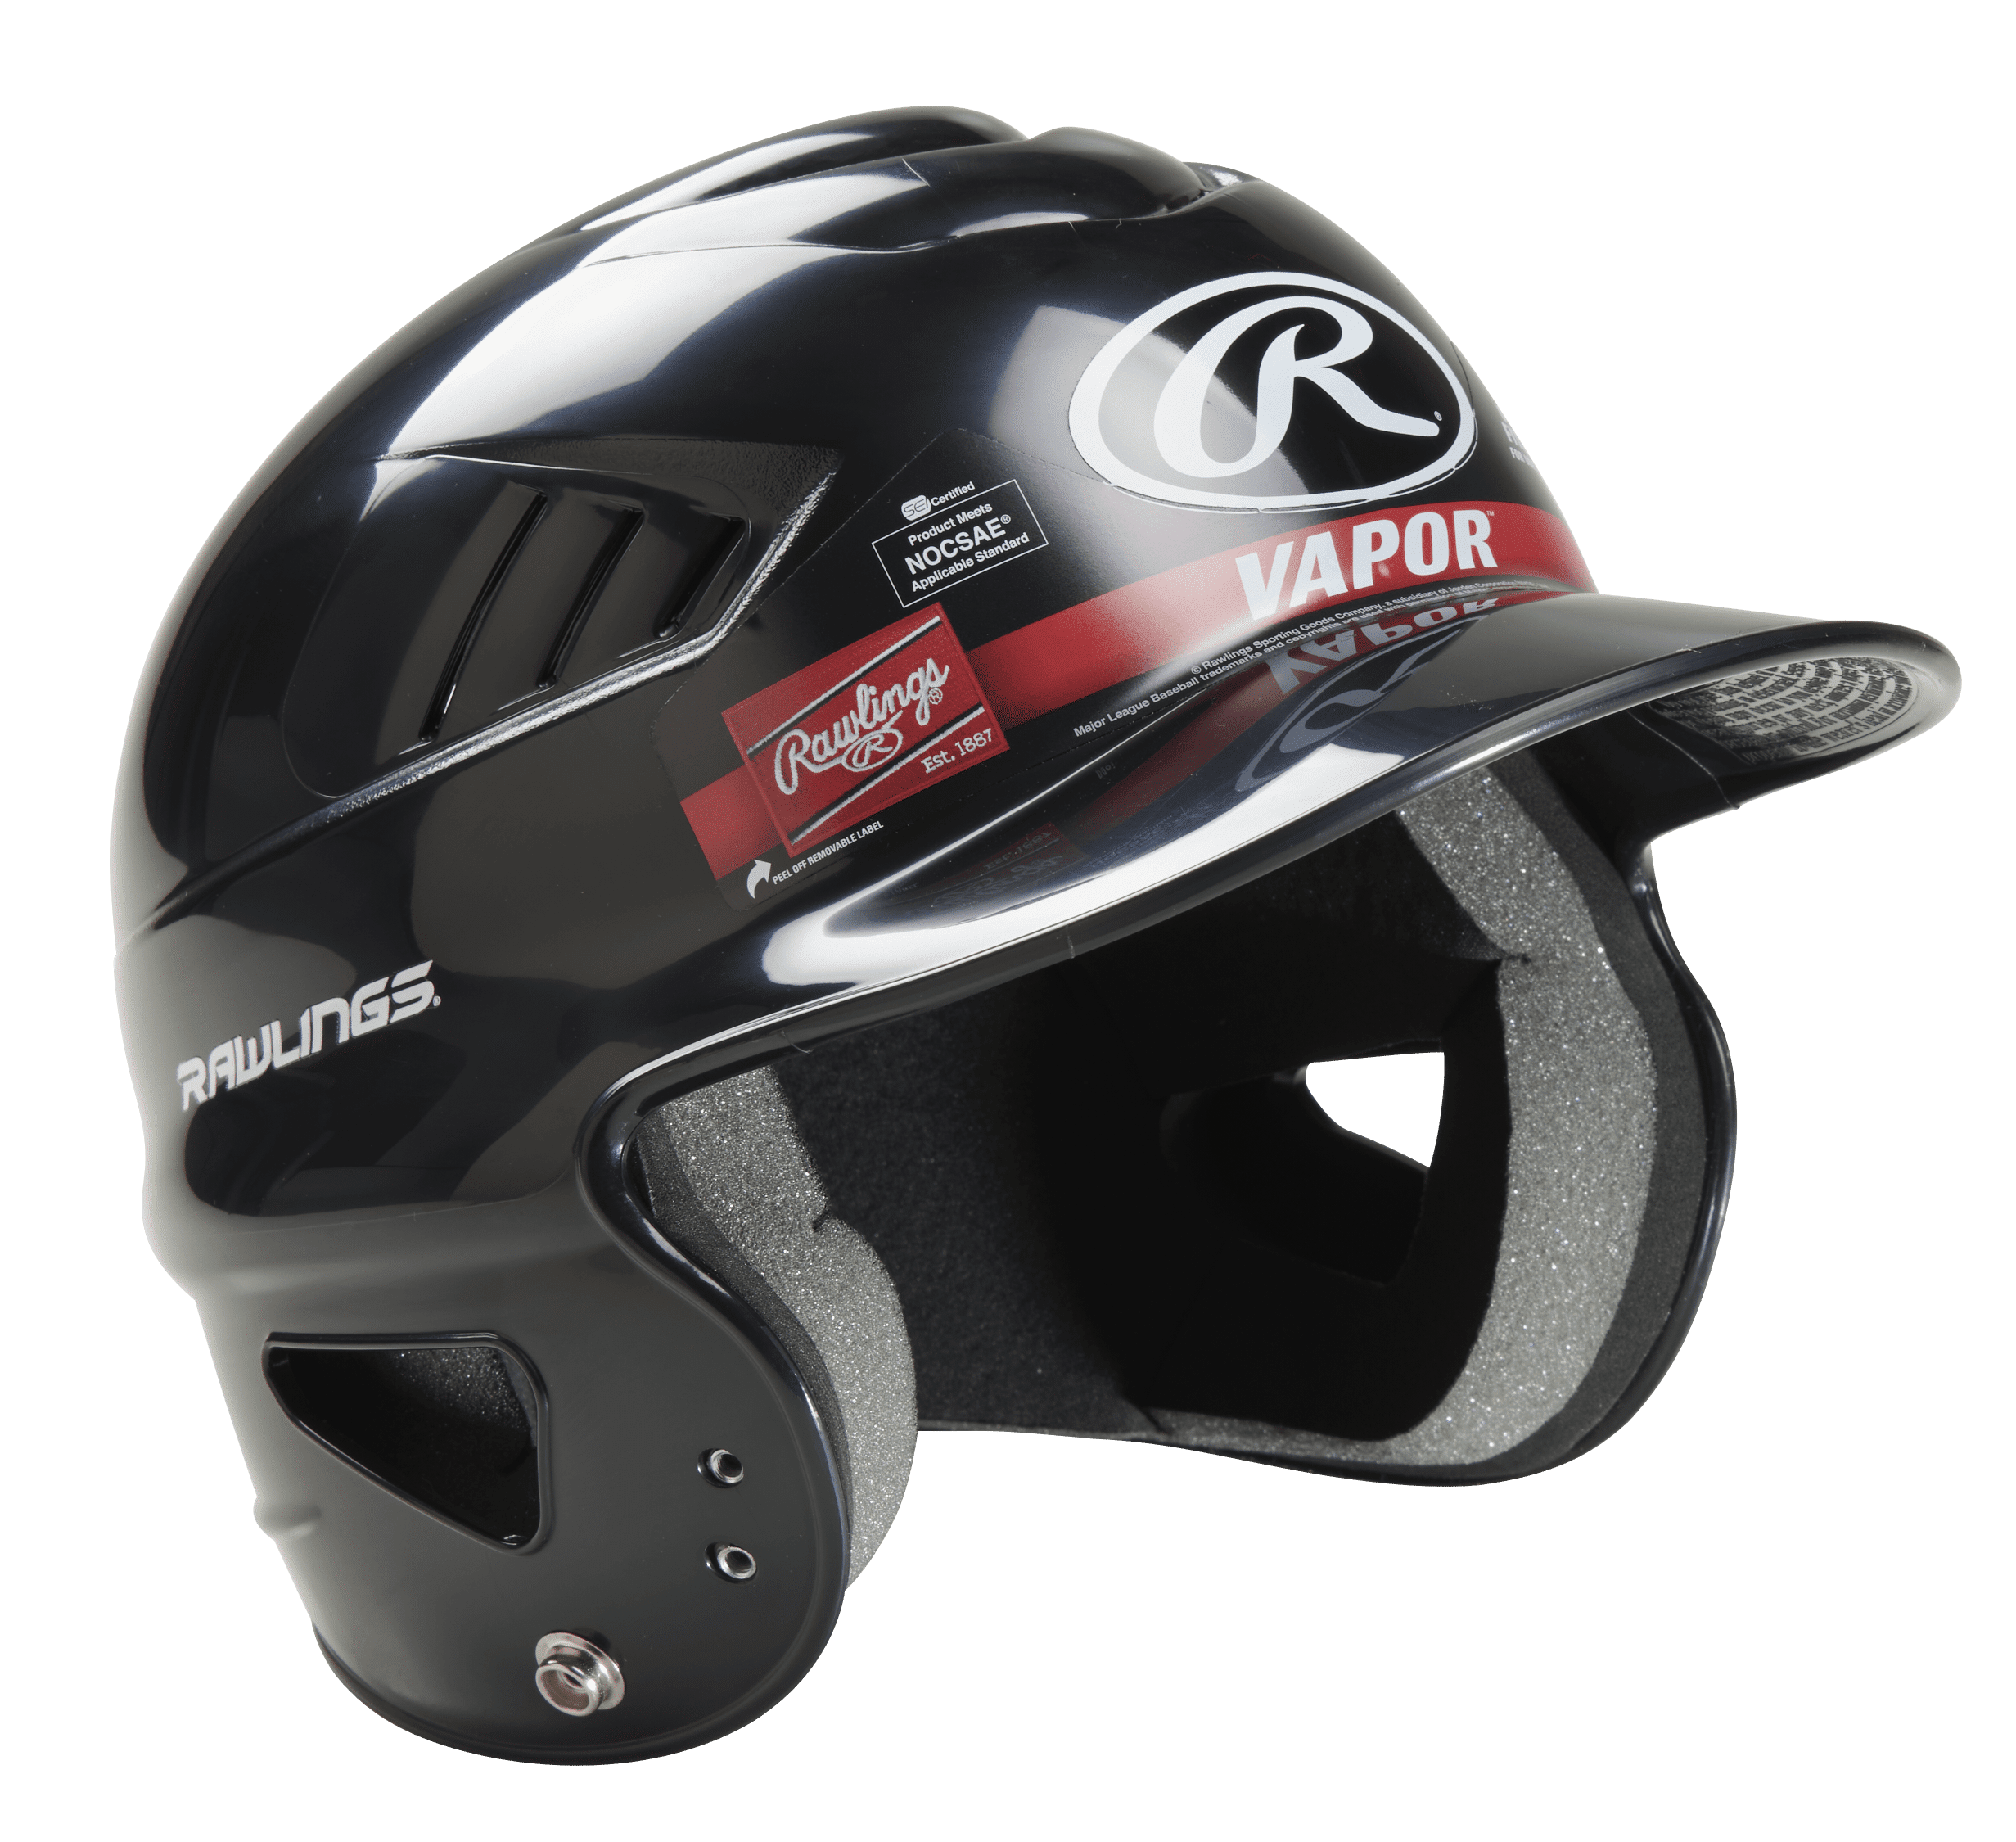 Vapor Rawlings Youth Batting Helmet with COOLFLO Technology One Size fits 6 1/2-7 1/2 for use in all leagues 